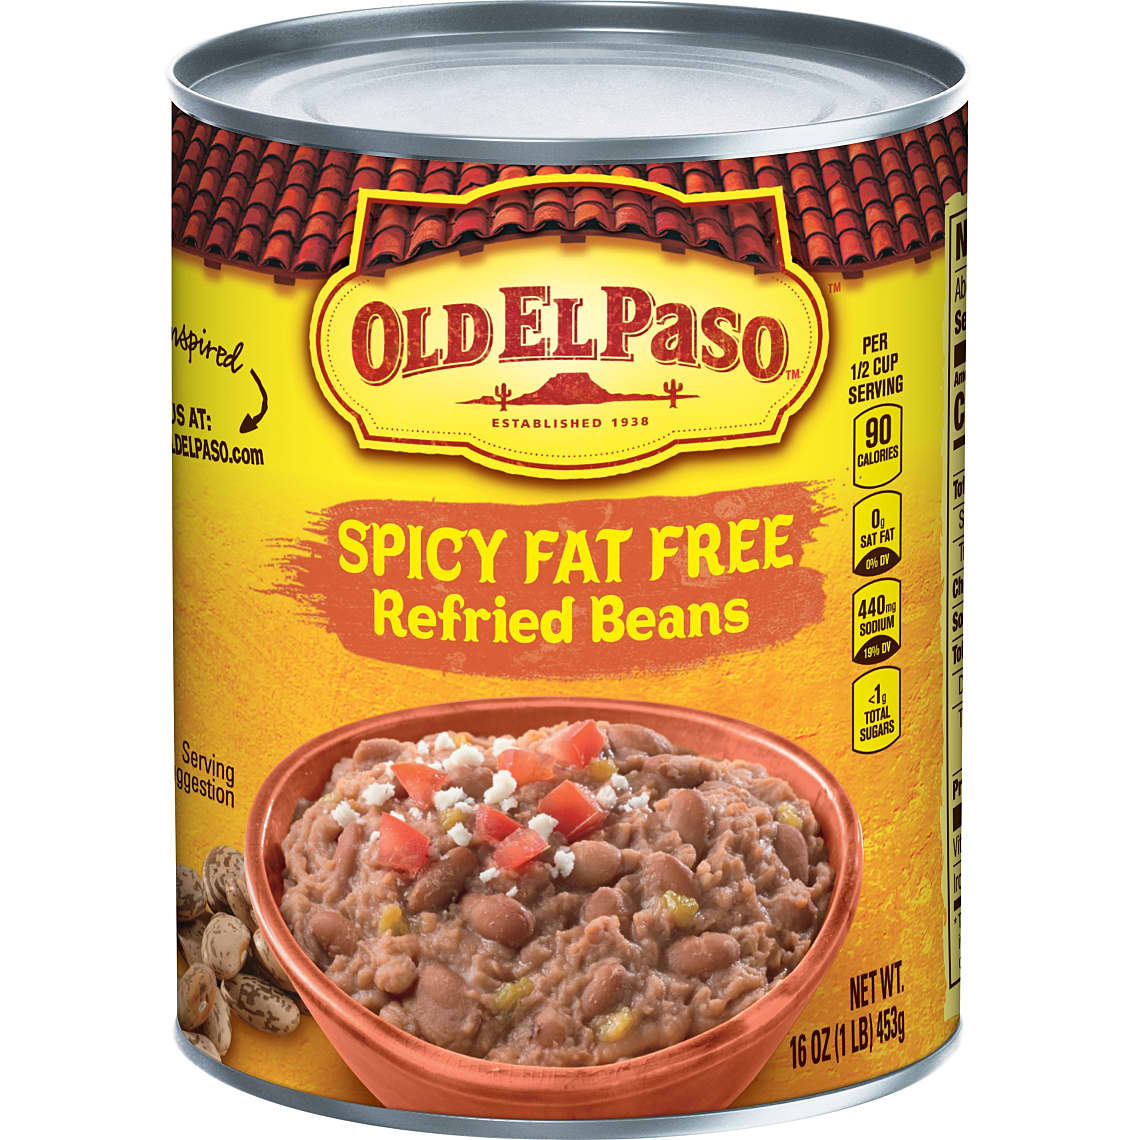 Spicy Fat Free Refried Beans16 oz